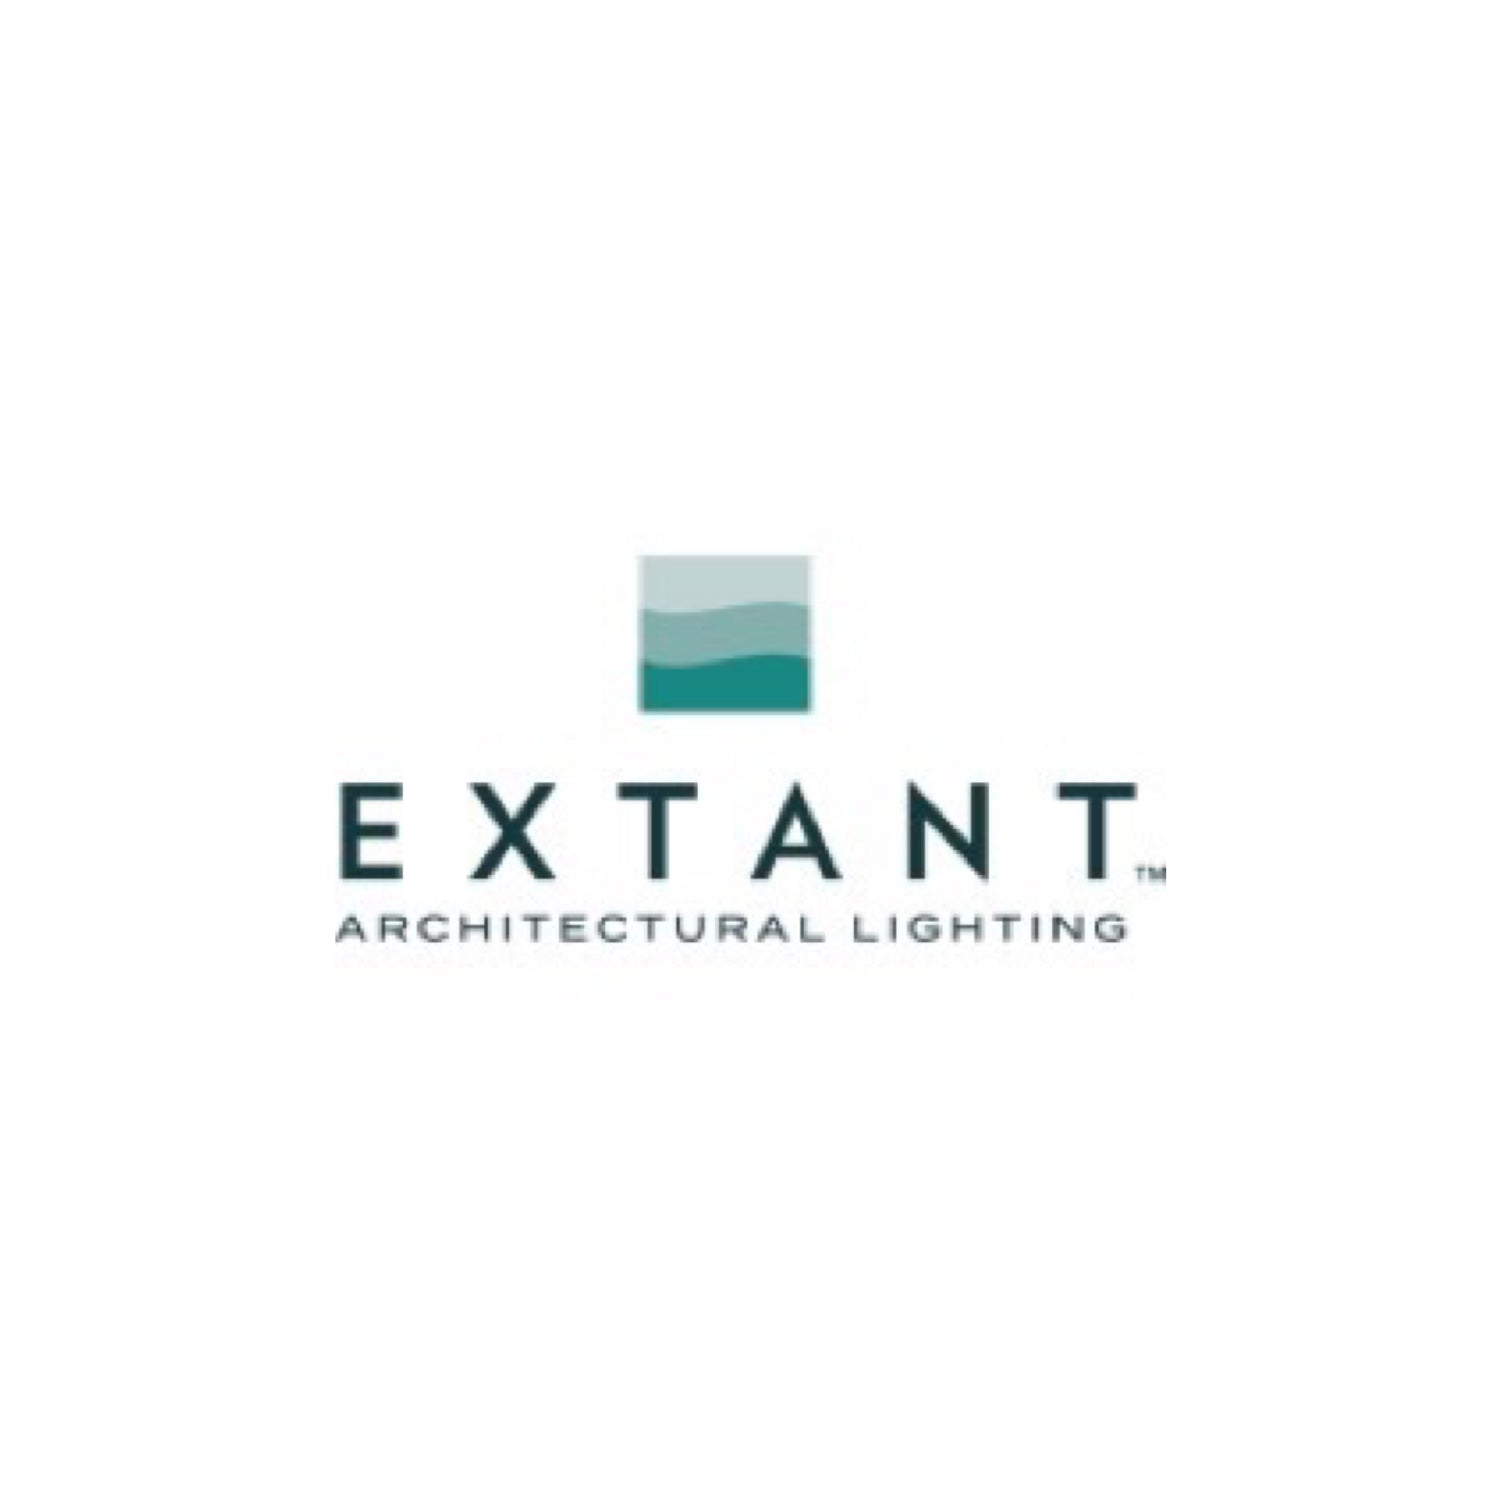 EXTANT ARCHITECTURAL LIGHTING